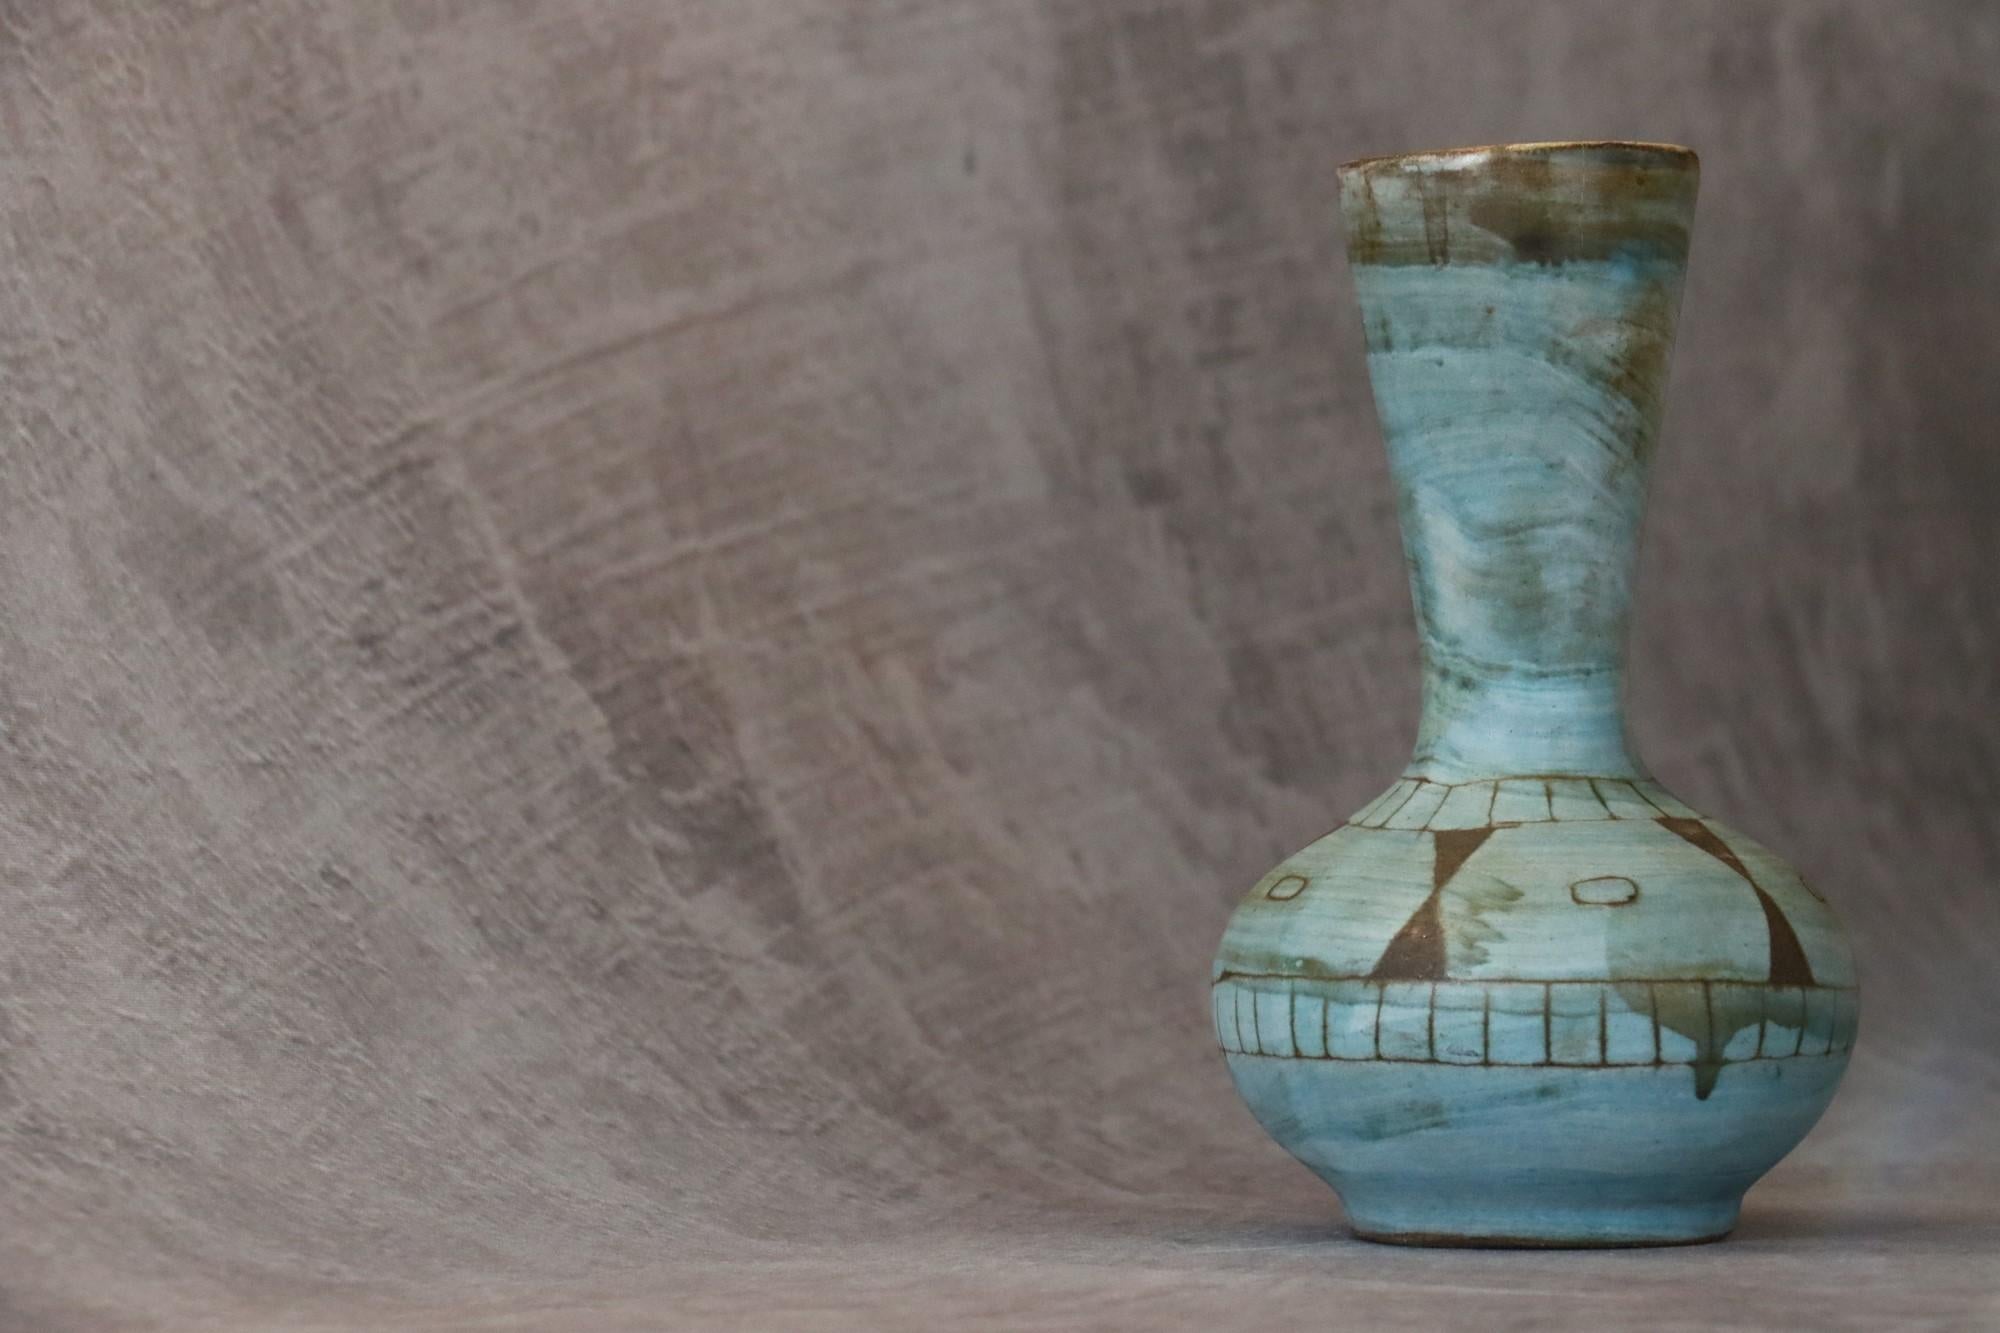 French ceramic blue and black glazed vase by Alain Maunier, Vallauris - 1970's.
Typical of Alain Maunier's creations, this blue enamelled vase is decorated with black geometric patterns. Comparable to the work of Jacques Blin, it is a beautiful